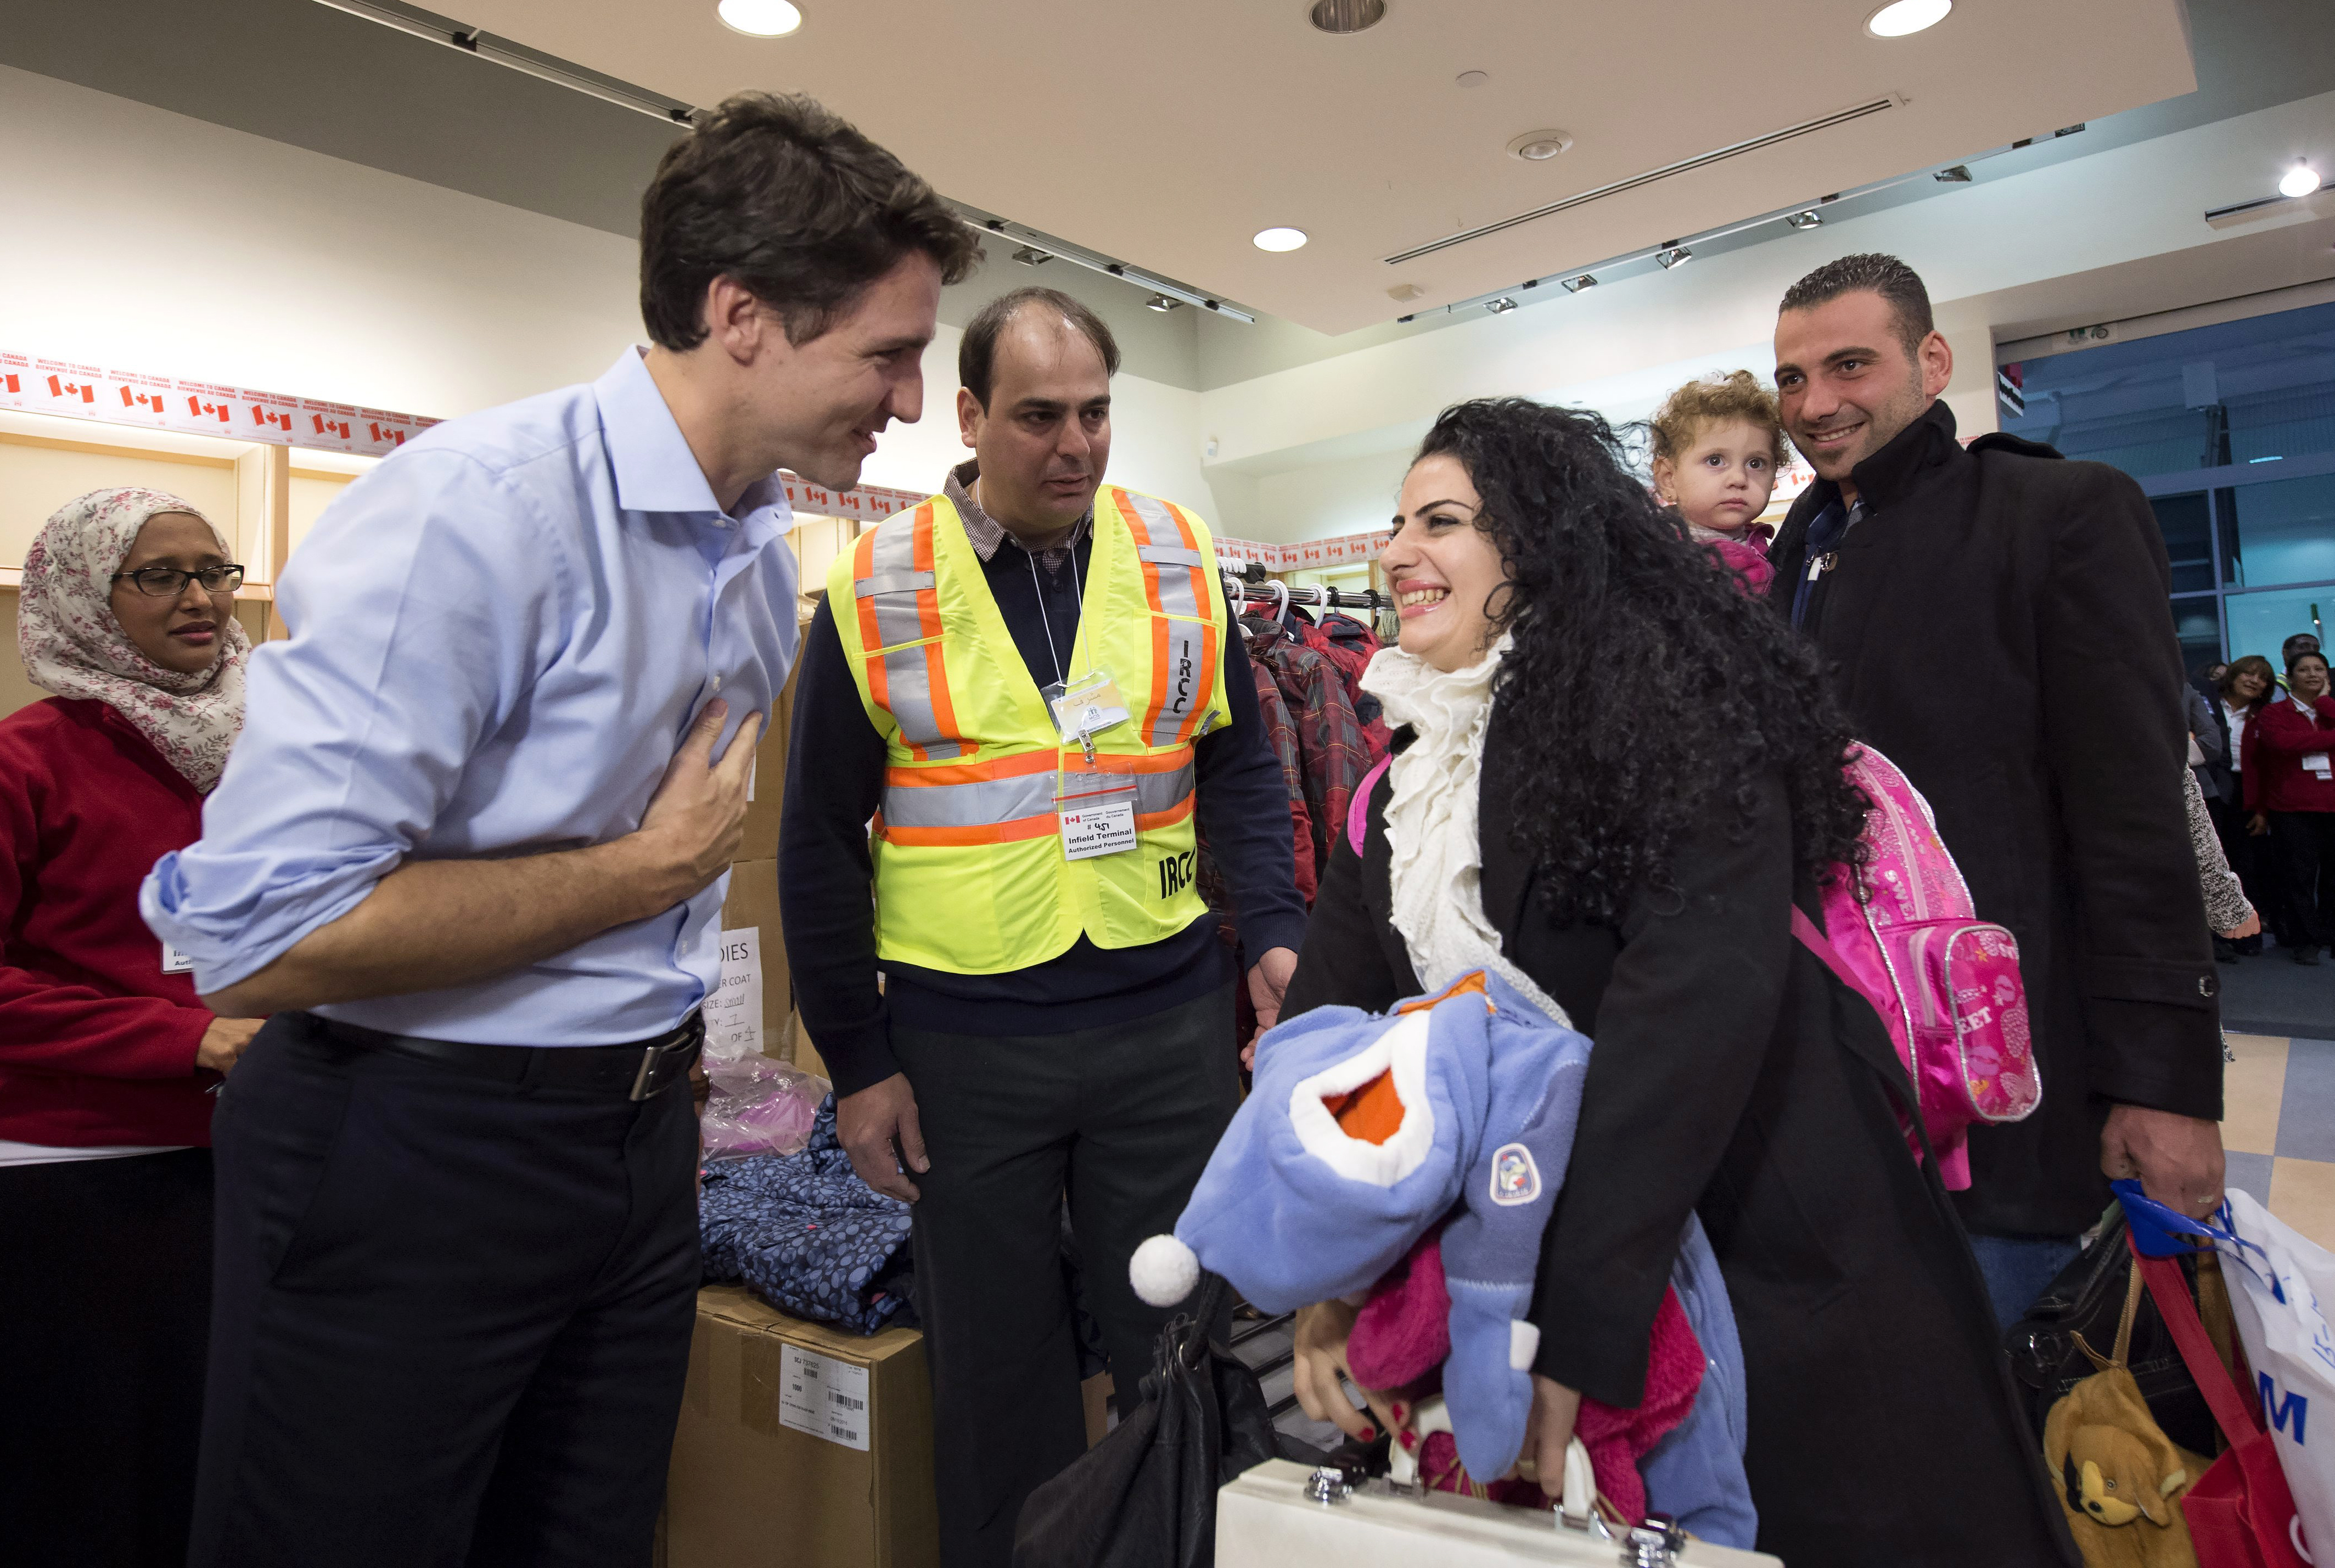 ustin Trudeau greets refugees fleeing from Syria, as they arrive at Pearson International airport, in Toronto, on Dec. 11, 2015. (Nathan Denette—AP)